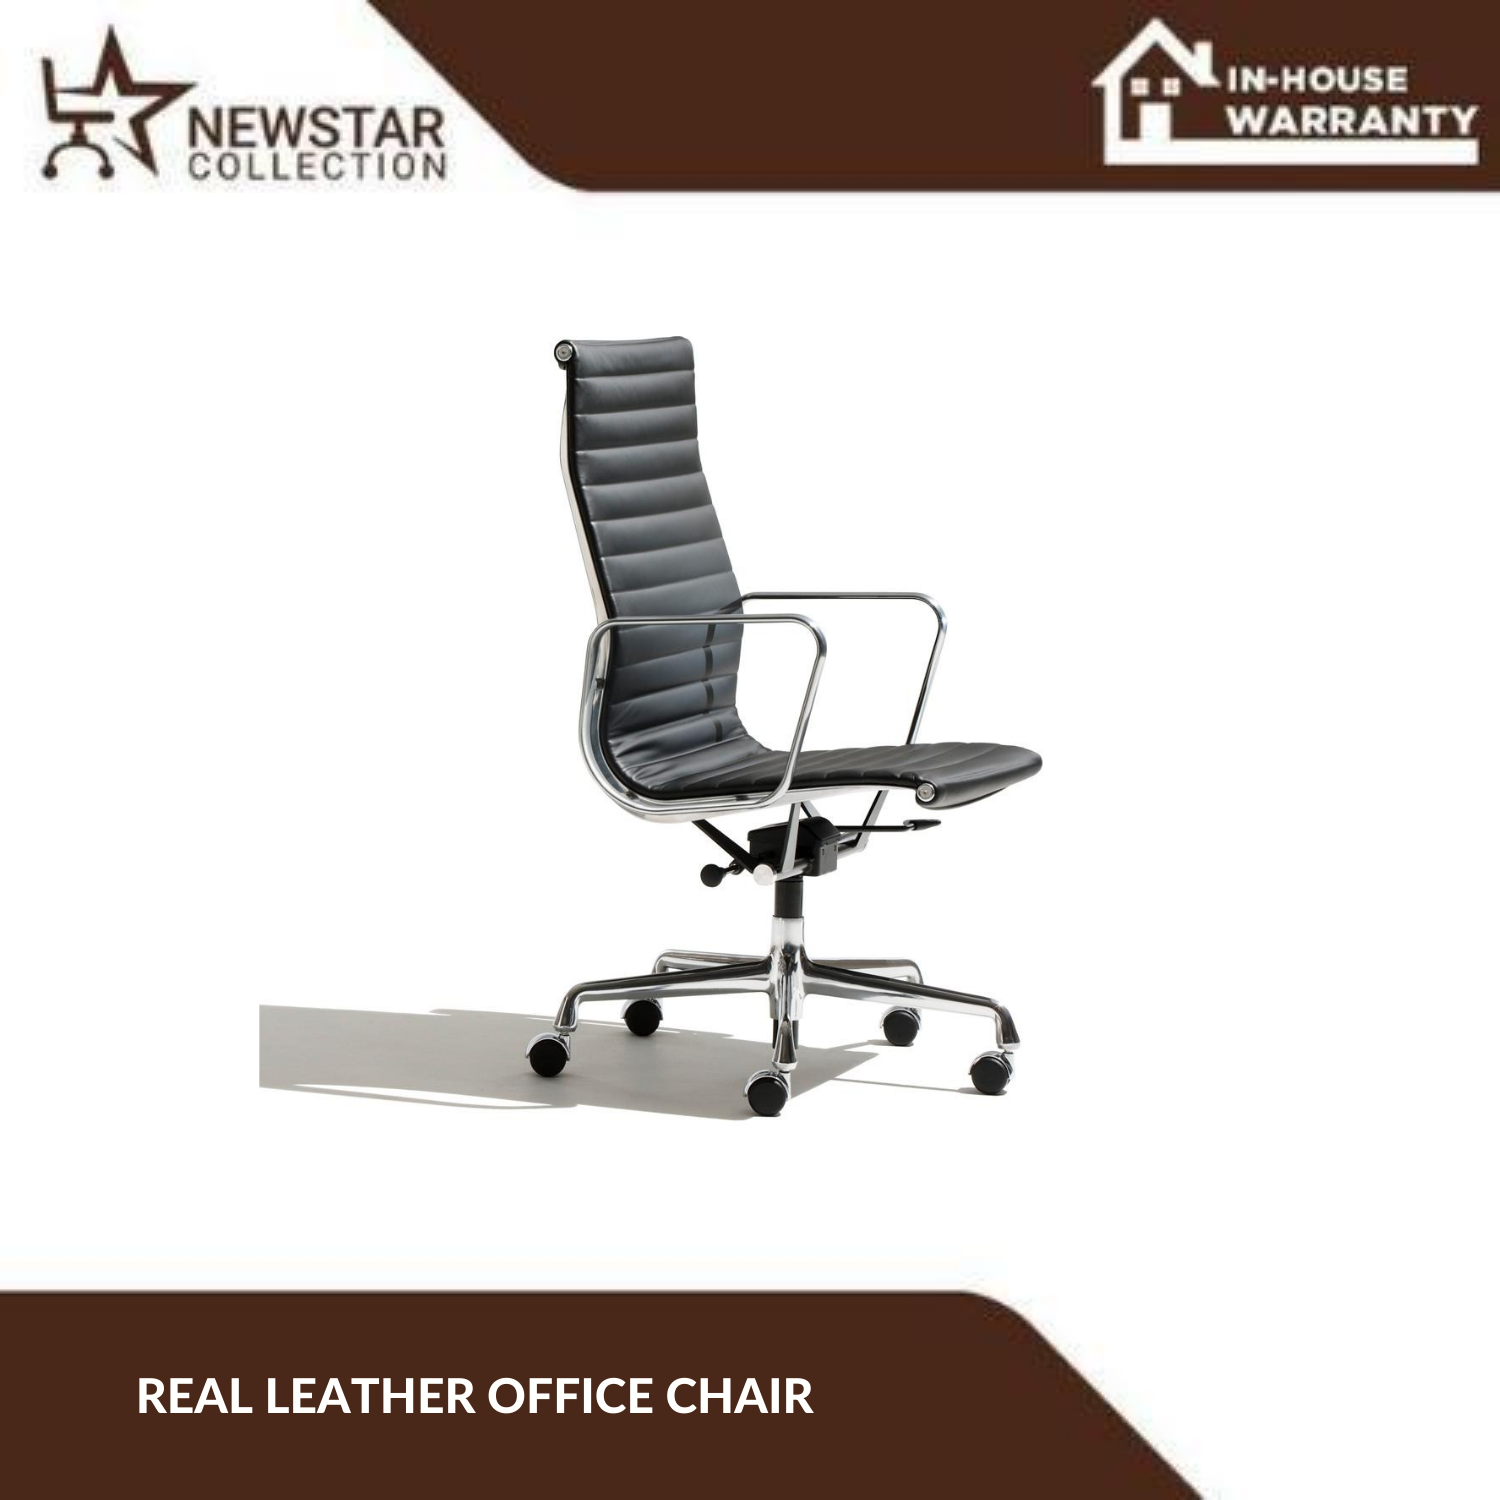 Herman Miller 1 1 Real Leather Eames Chair Inspired Version Tall Back Model Leather Office Chair Newstar Furniture Collection Lazada Singapore